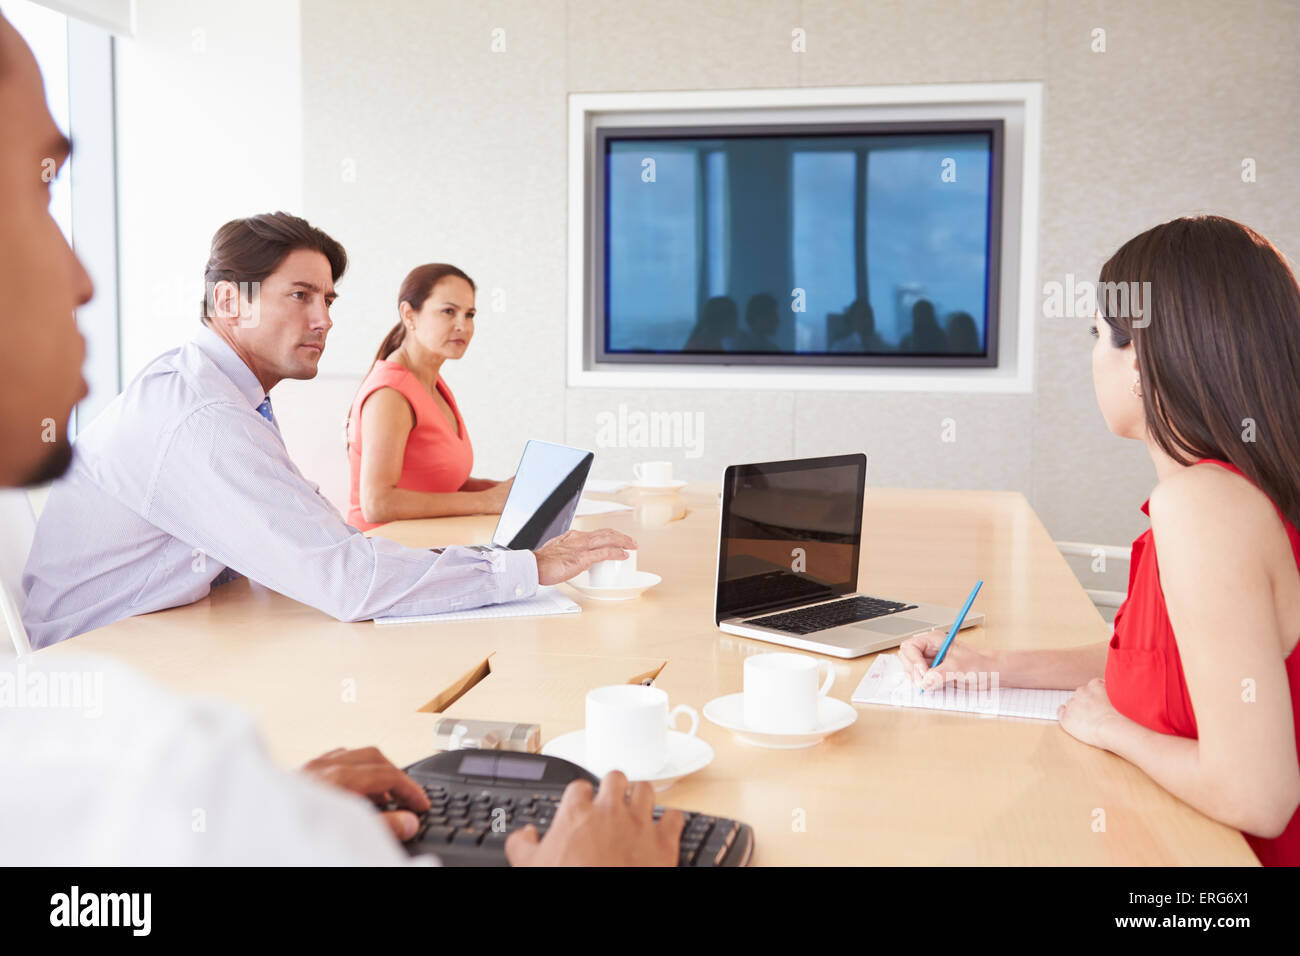 Four Businesspeople Having Video Conference In Boardroom Stock Photo